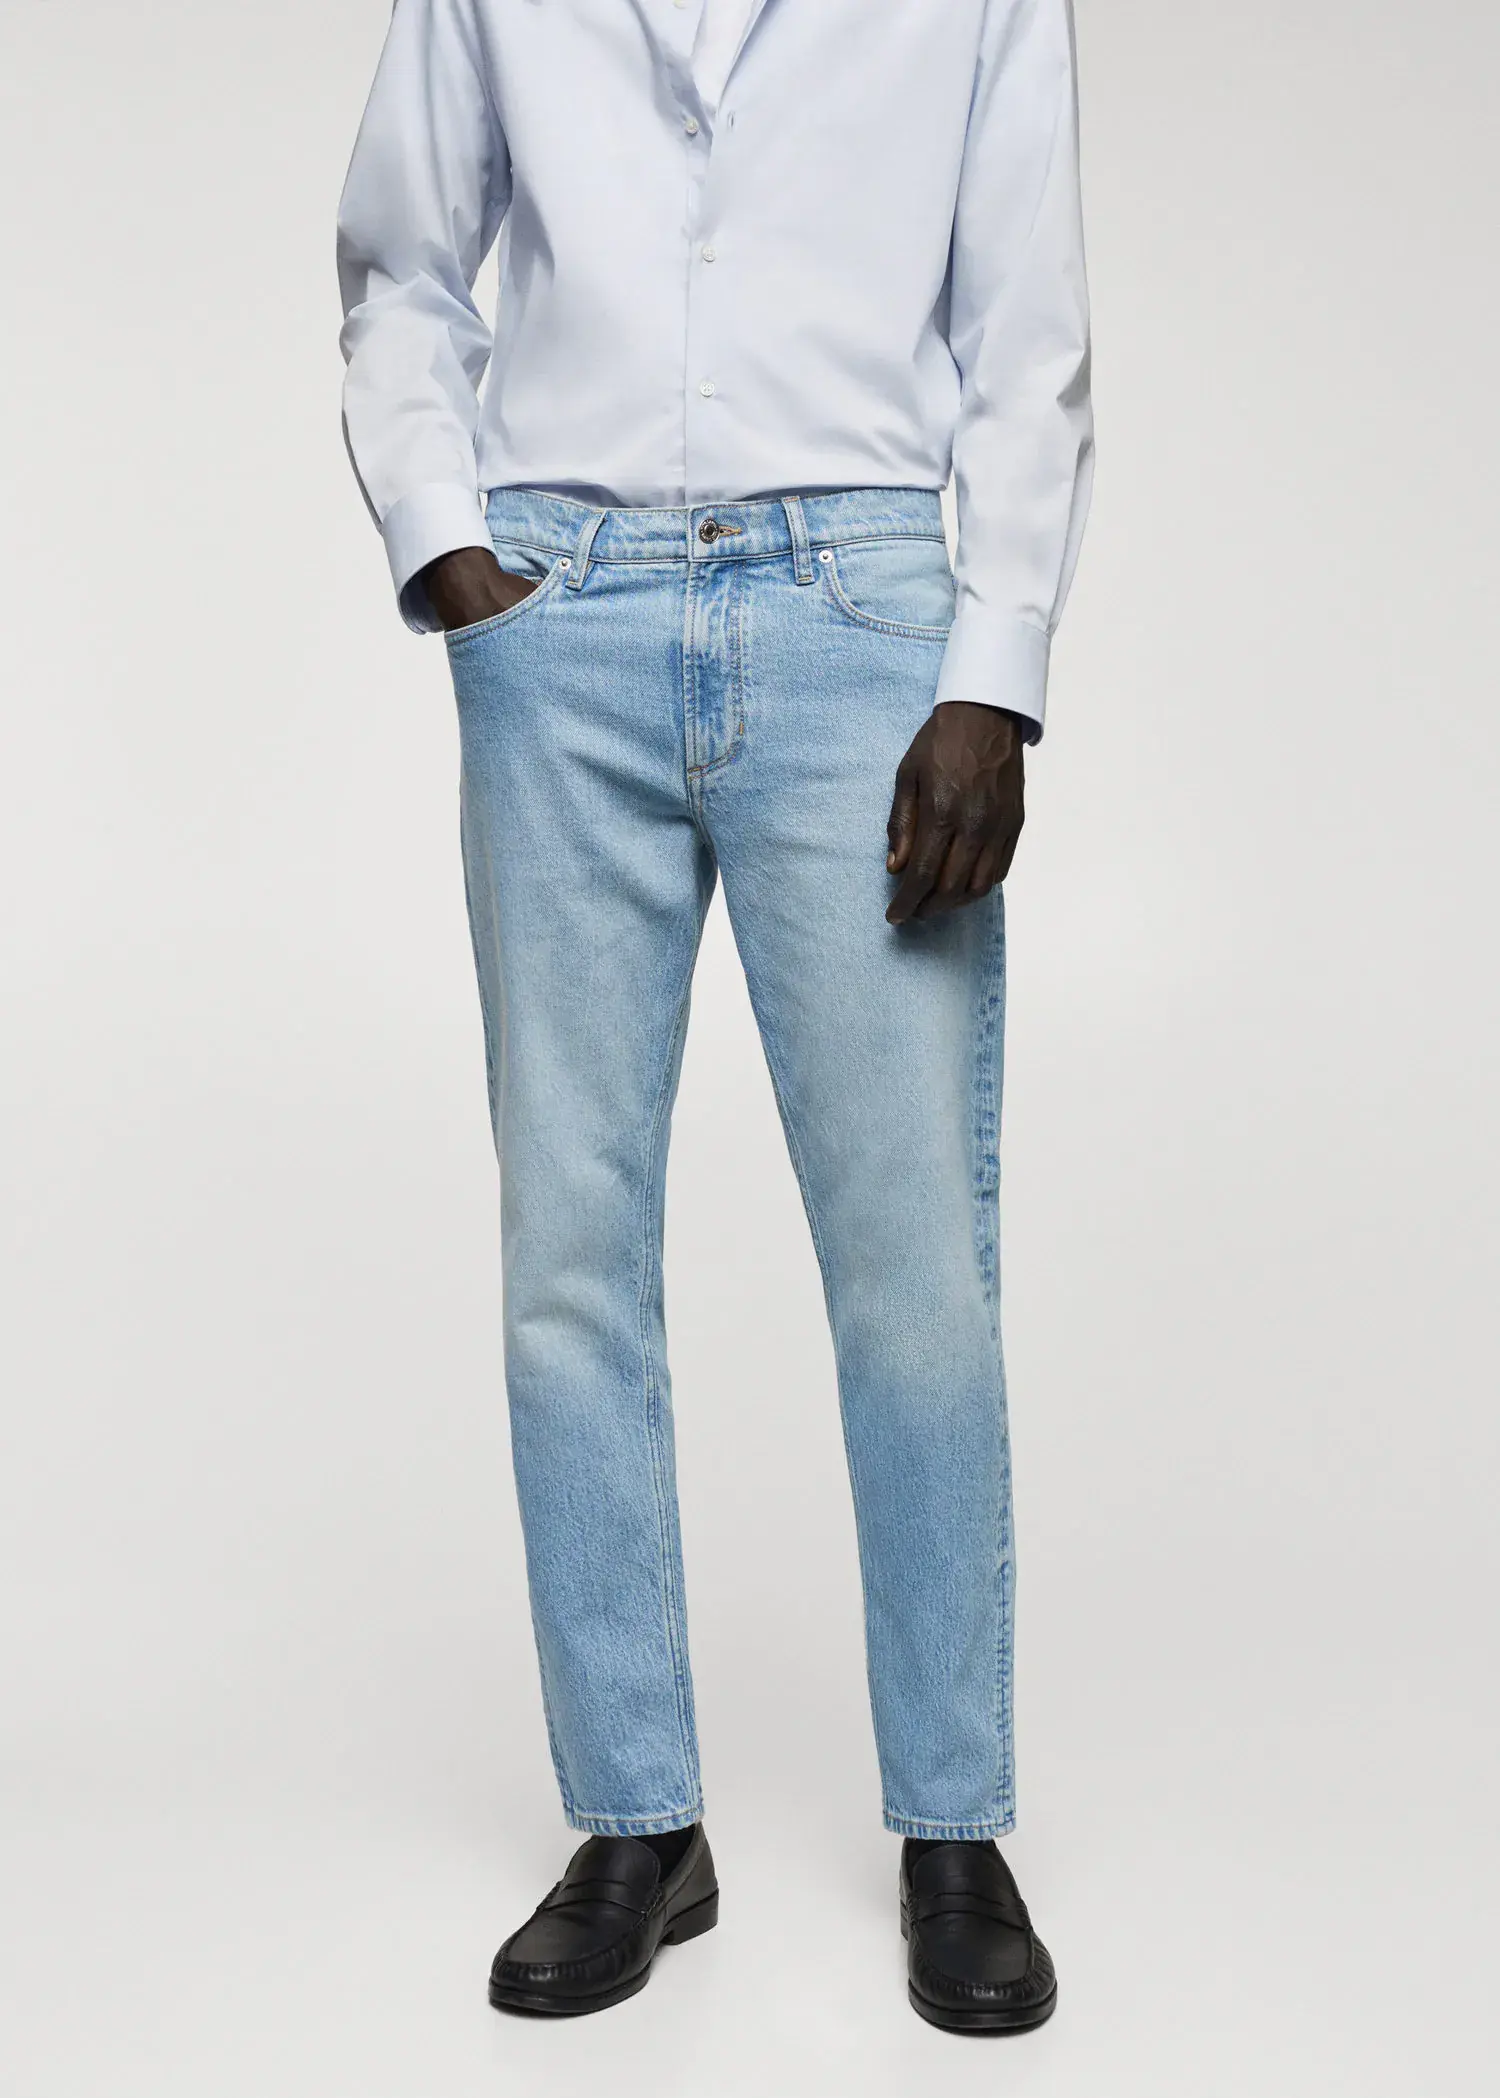 Mango Ben tapered fit jeans. 2